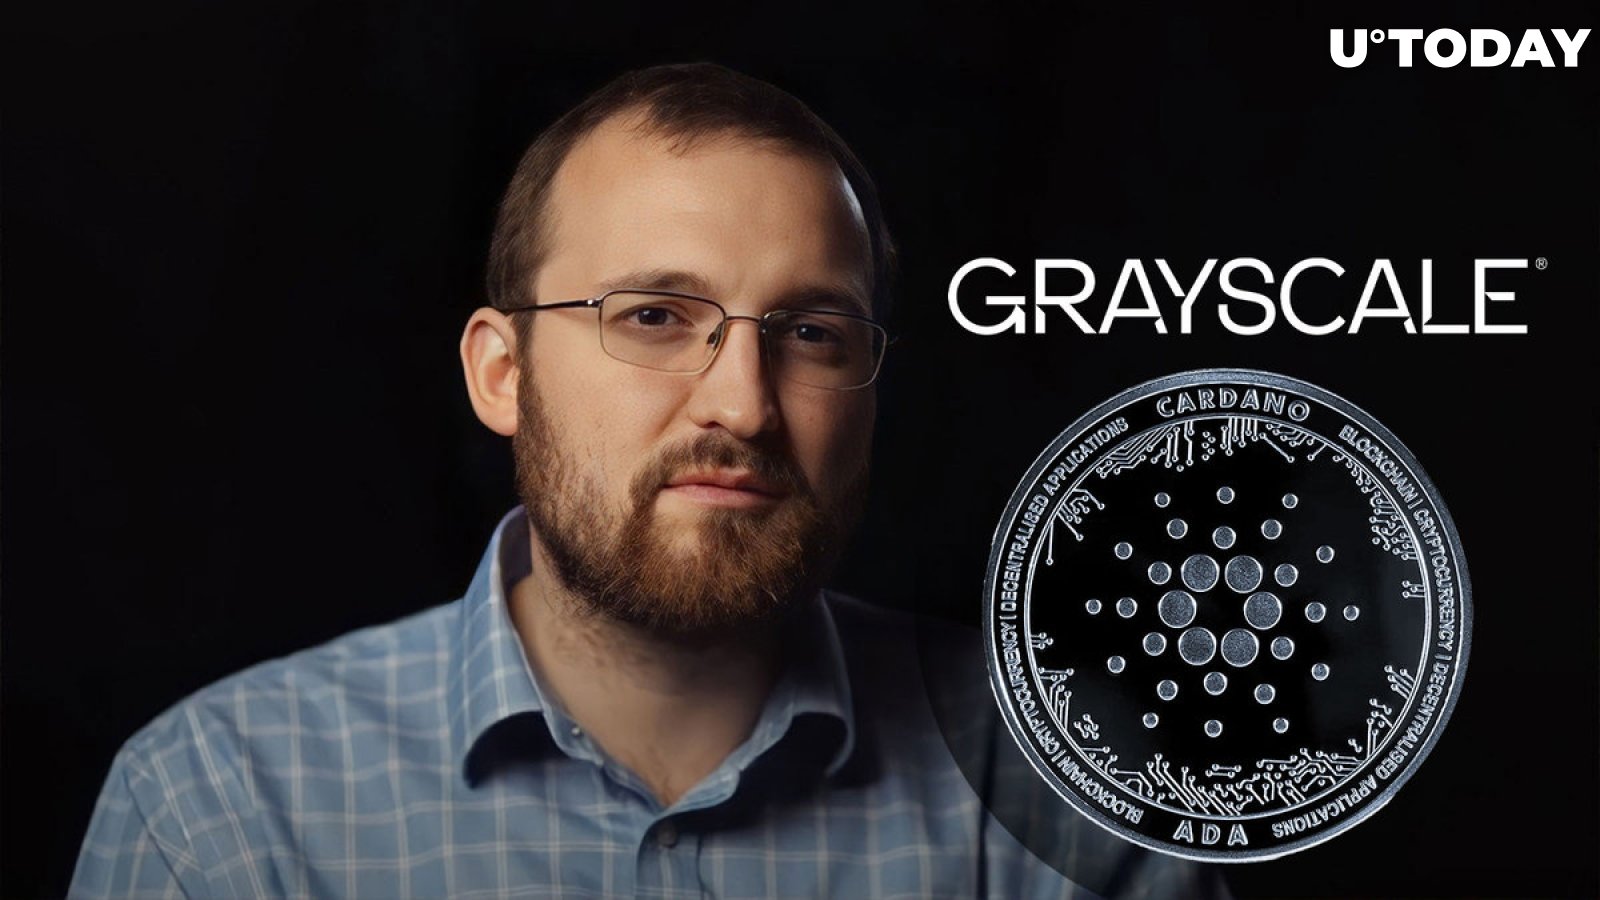 If nothing?  Cardano Founder Reacts to ADA Exclusion from New Grayscale Fund